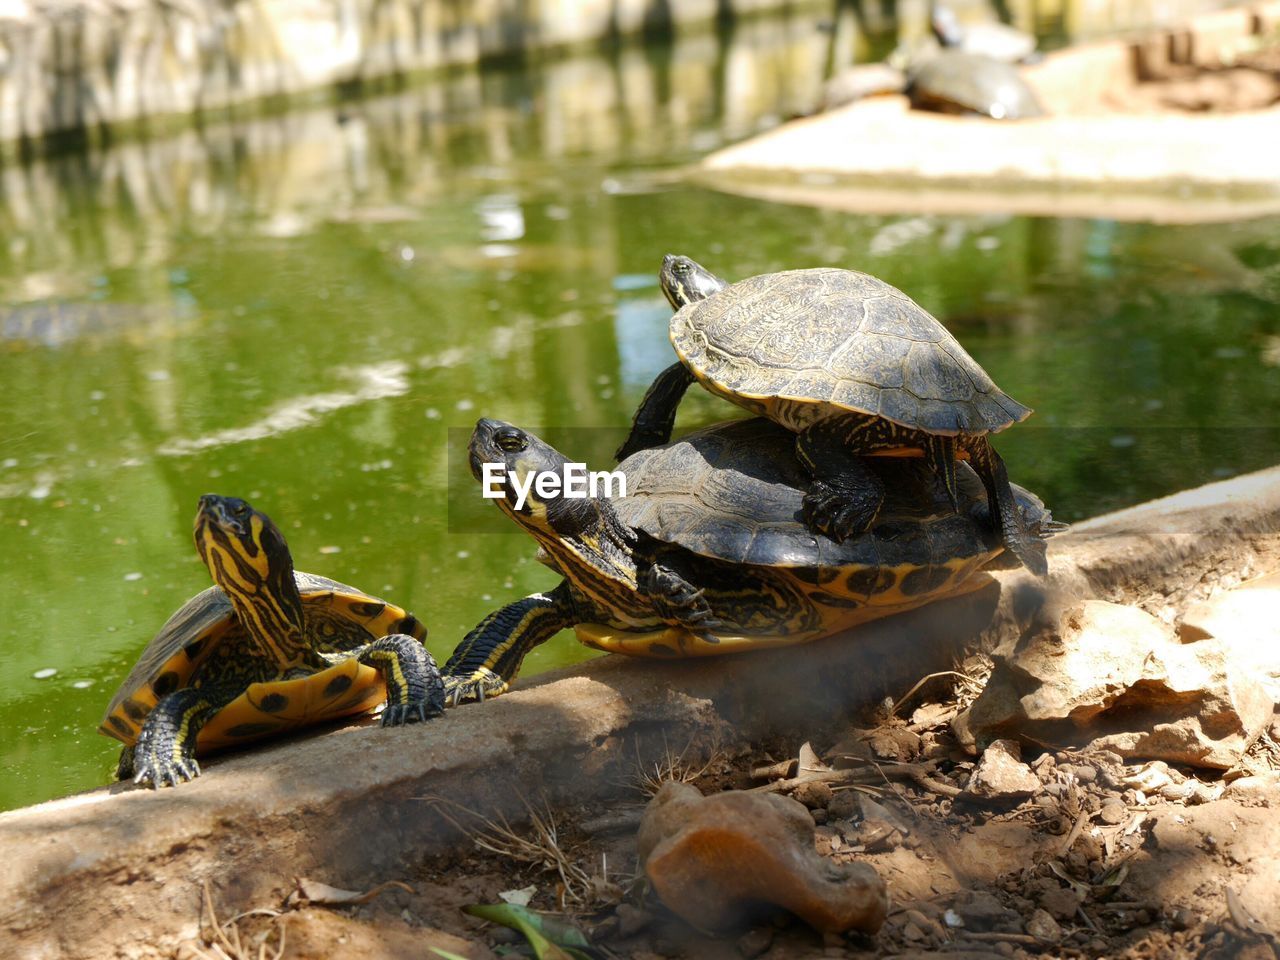 Close-up of turtles by lake